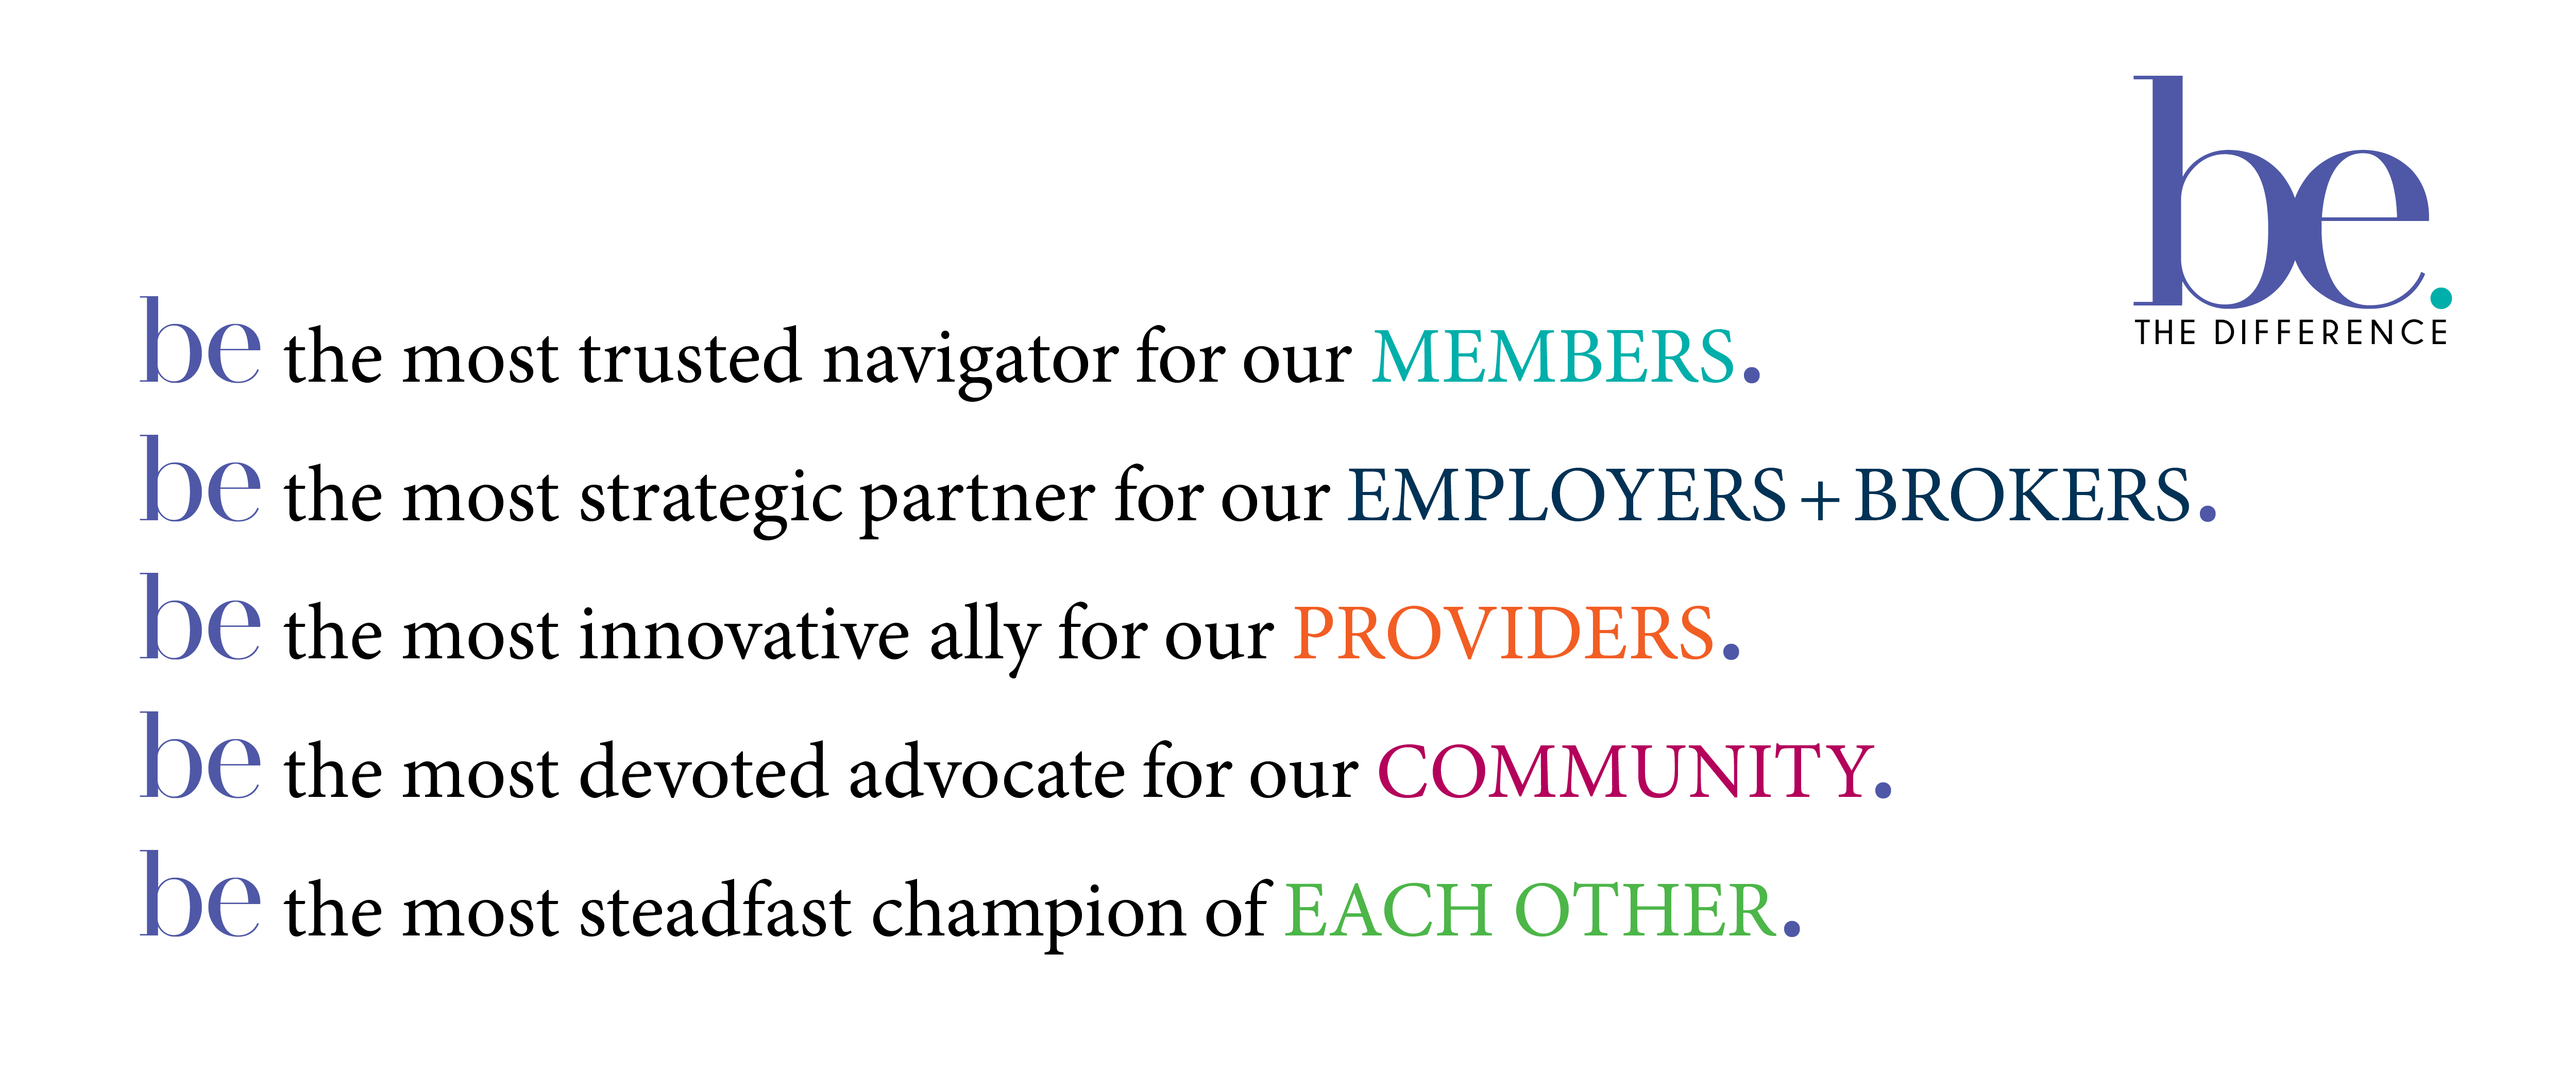 Medical Mutual Vision Statement. Be the most trusted navigator for our members. Be the most strategic partner for our employers and brokers. Be the most innovative ally for our providers. Be the most devoted advocate for our community. Be the most steadfast champion of each other.